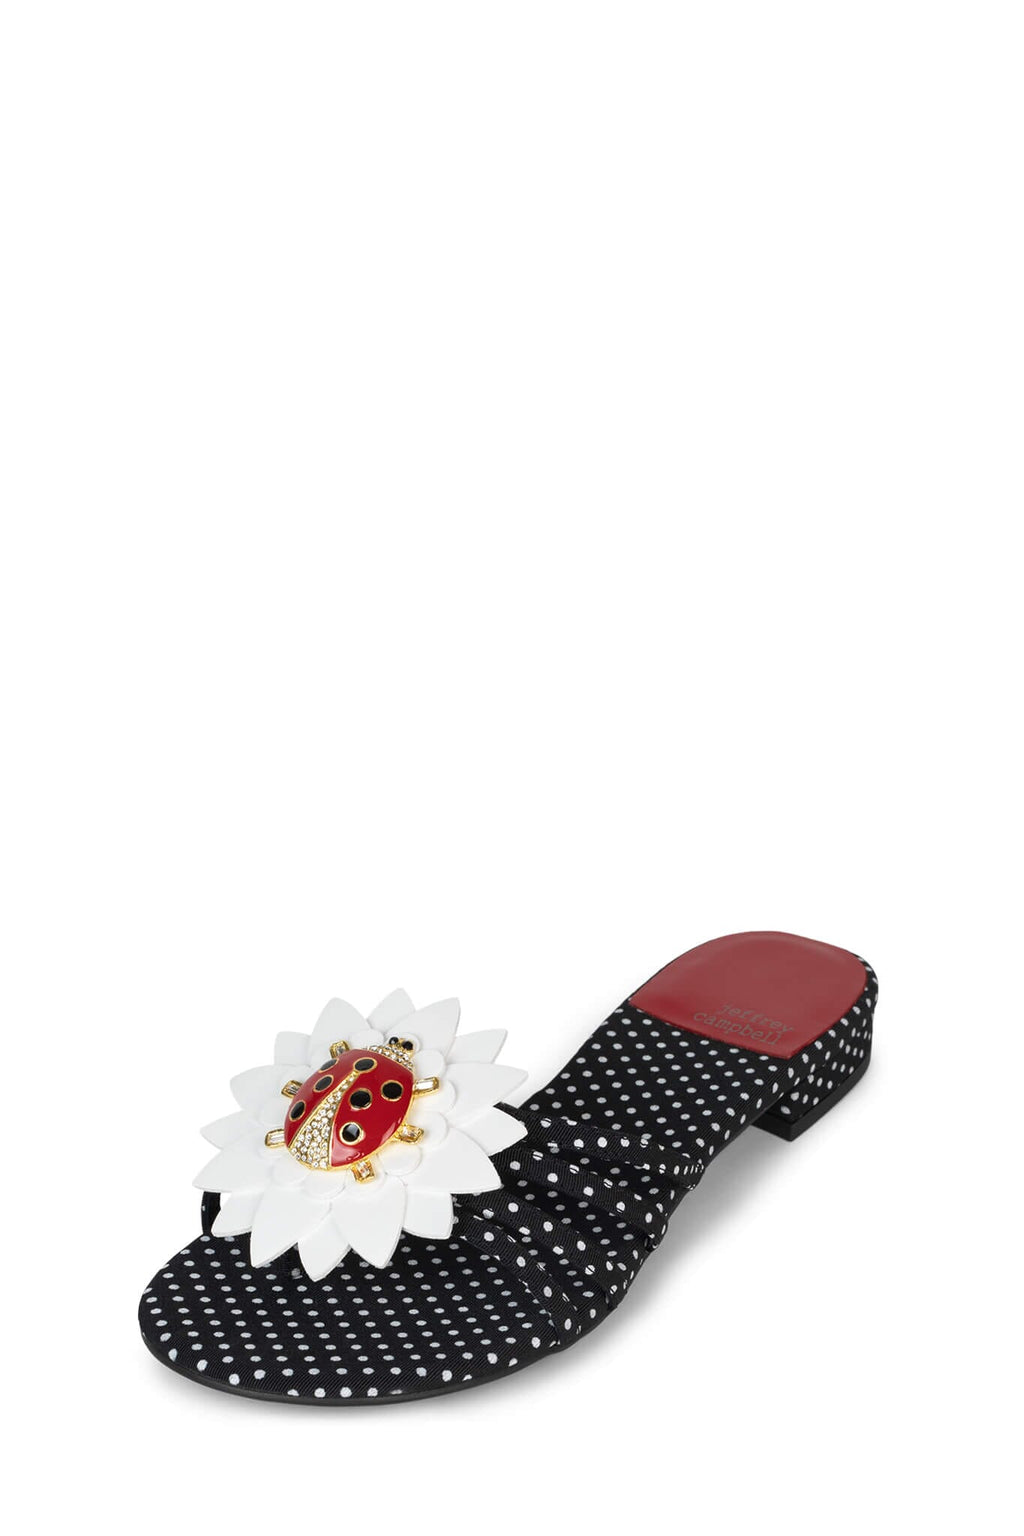 BUG-ME Jeffrey Campbell Sandals Black White Red Combo